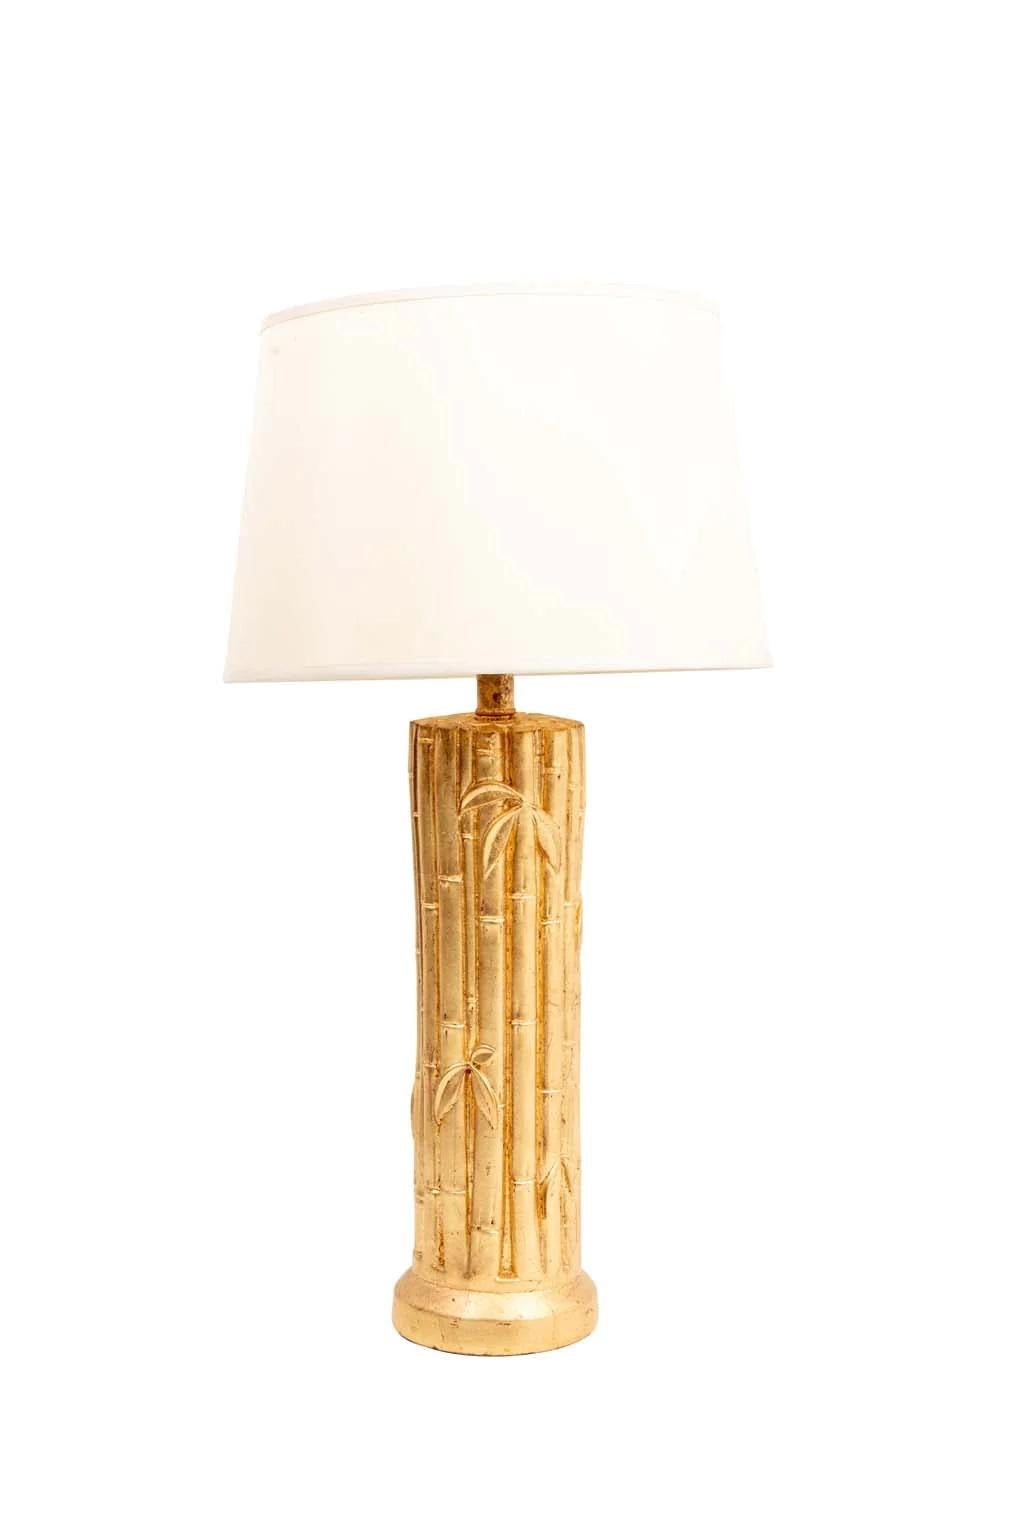 Plaster Vintage Gilt Faux Bamboo Lamp For Sale